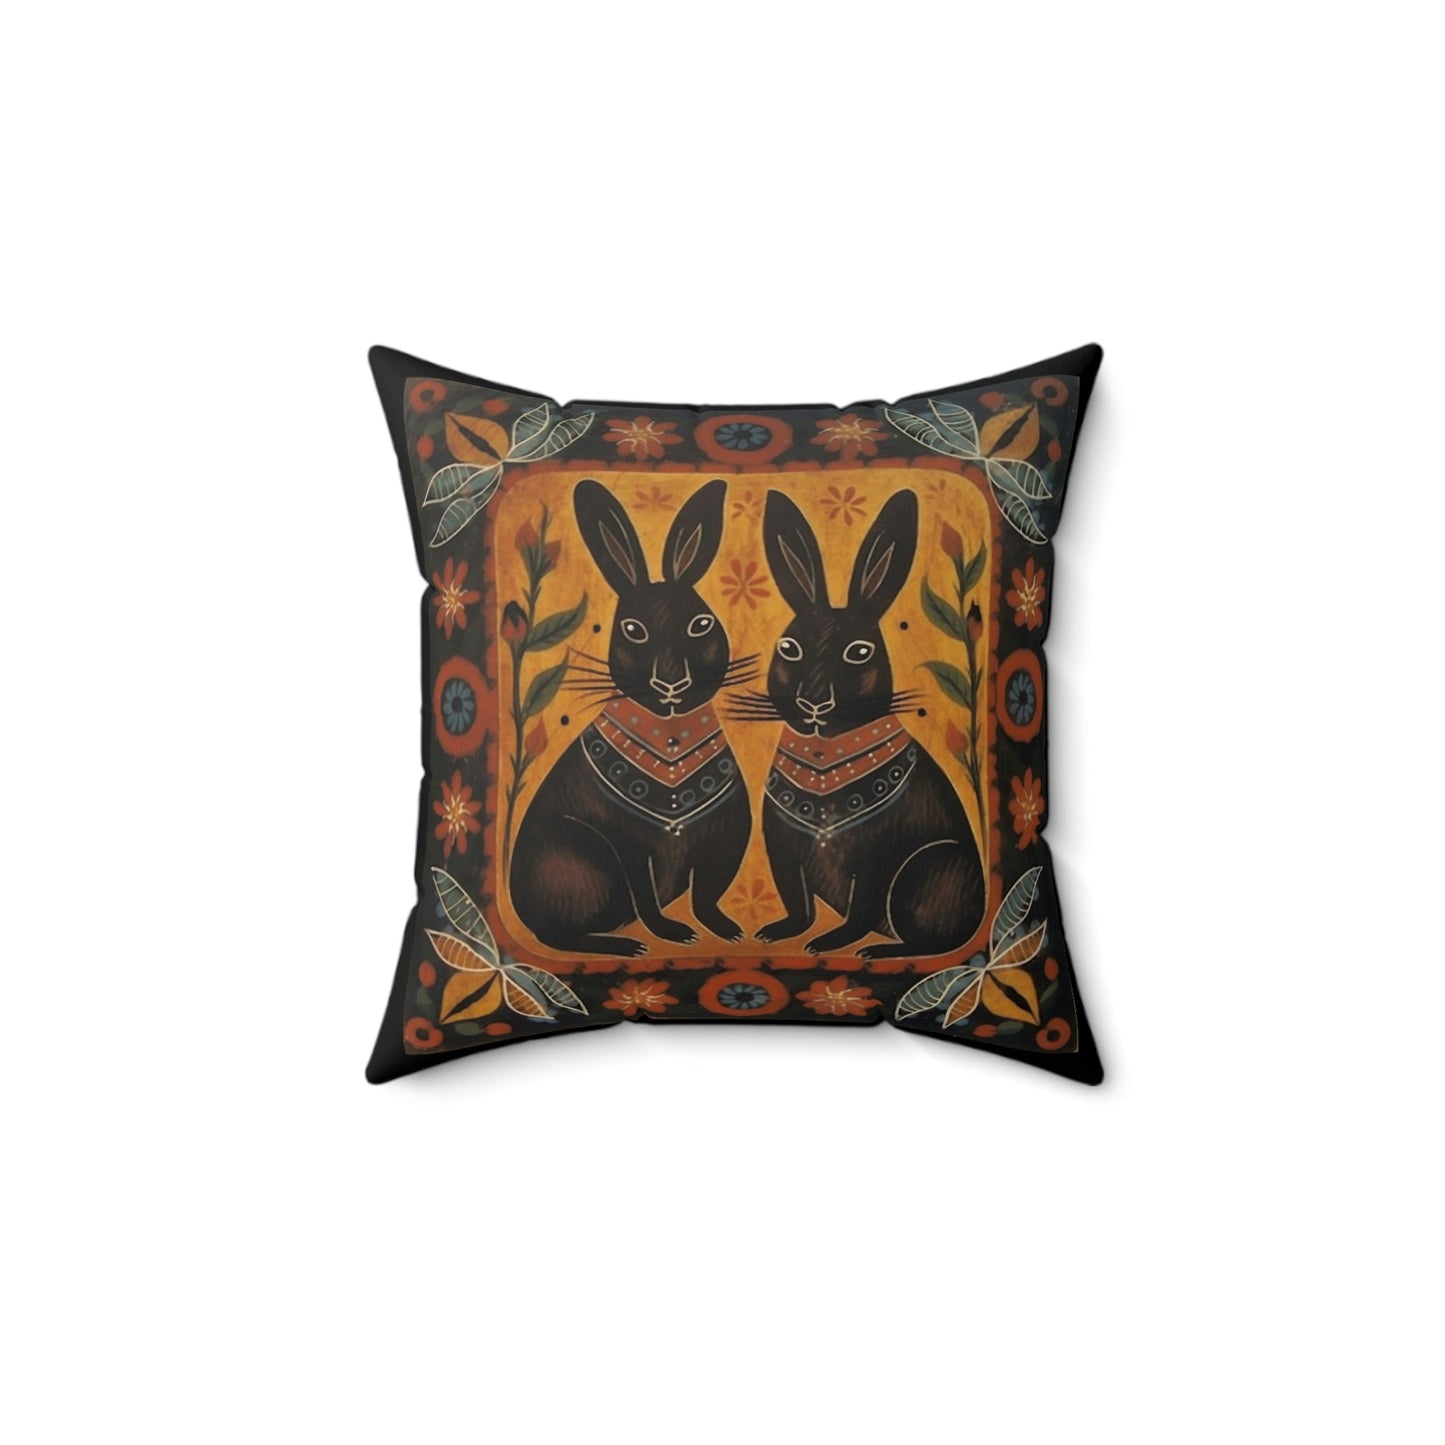 Rustic Folk Art Bunny Couple Design Square Pillow - Cottagecore Country Farm Style Gift for Yourself or Loved Ones